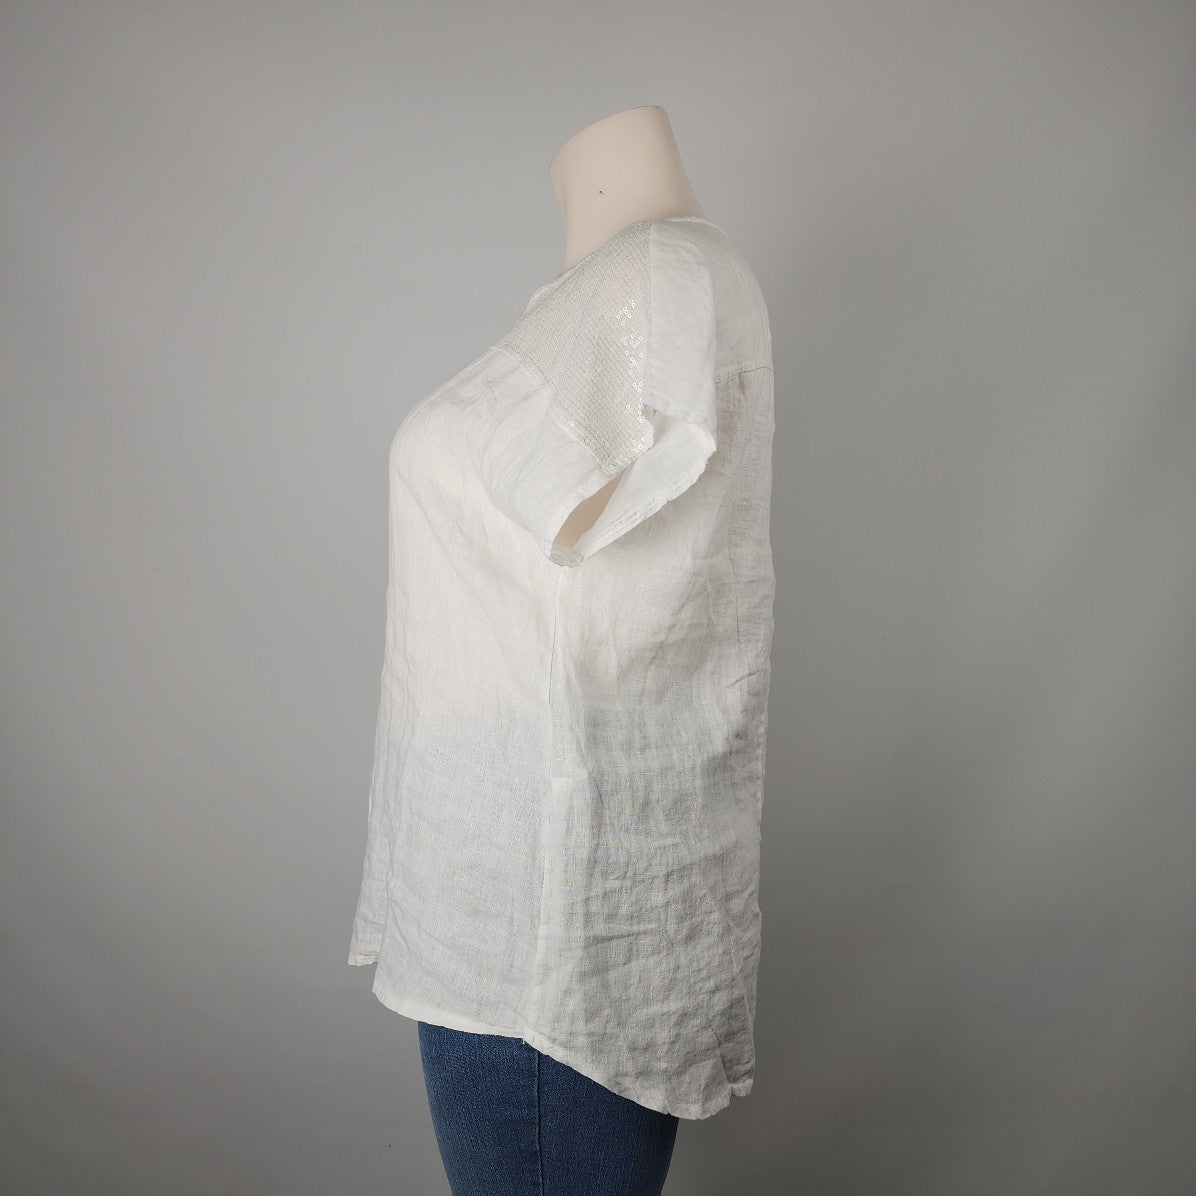 Lungo Lino White Linen Sequined Top Size 1XL